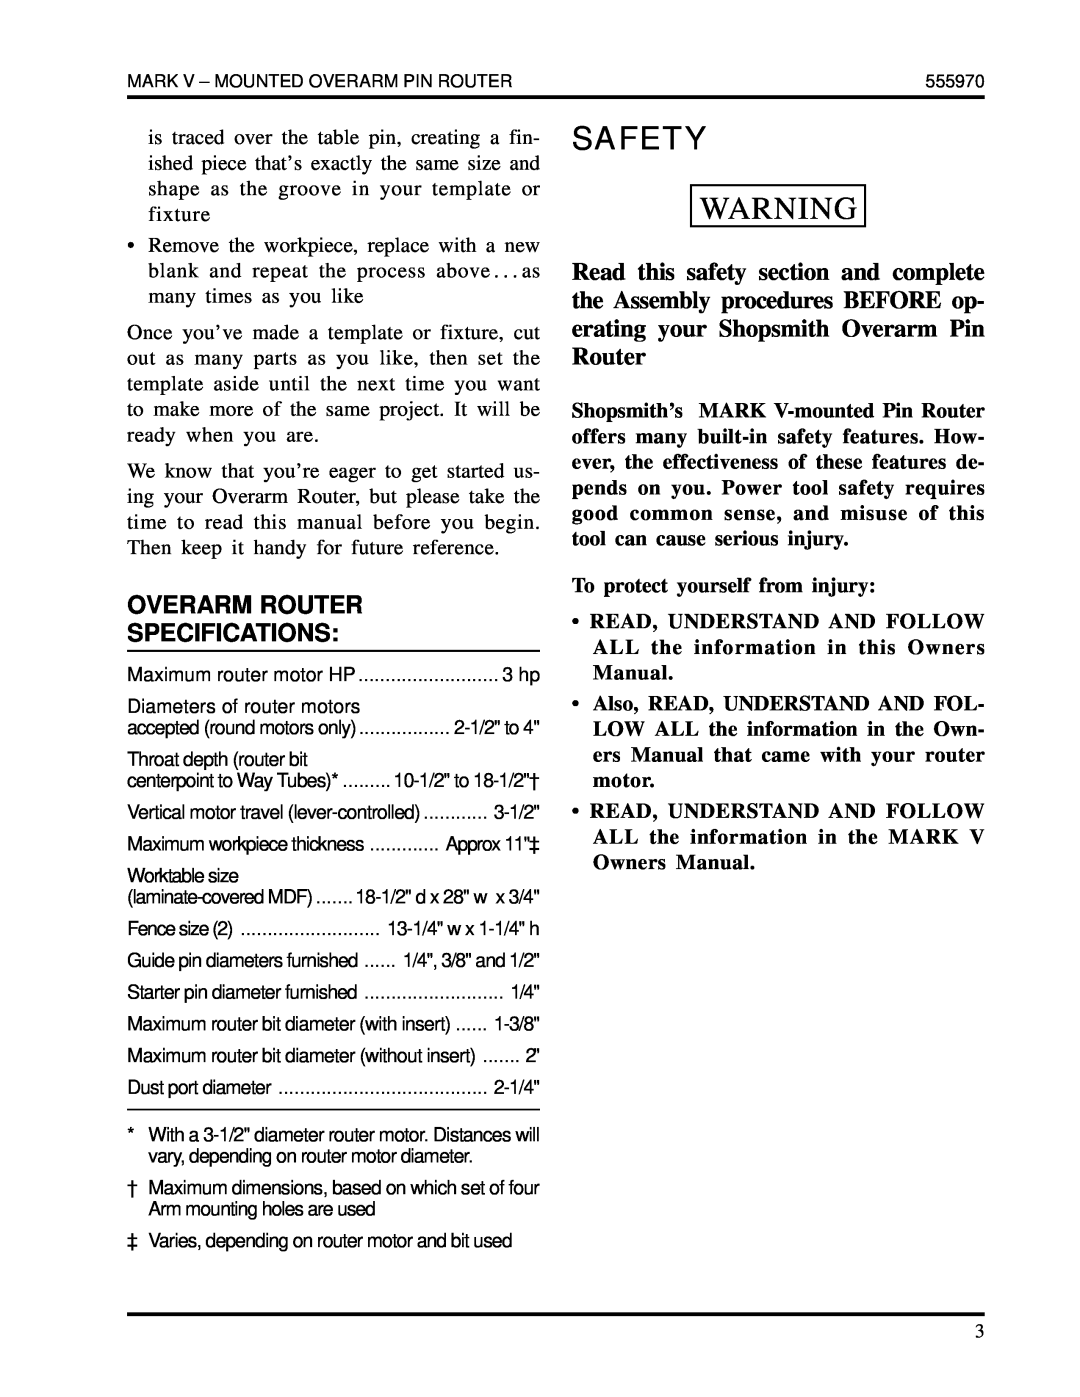 Shopsmith 555970 manual Safety, Overarm Router Specifications 